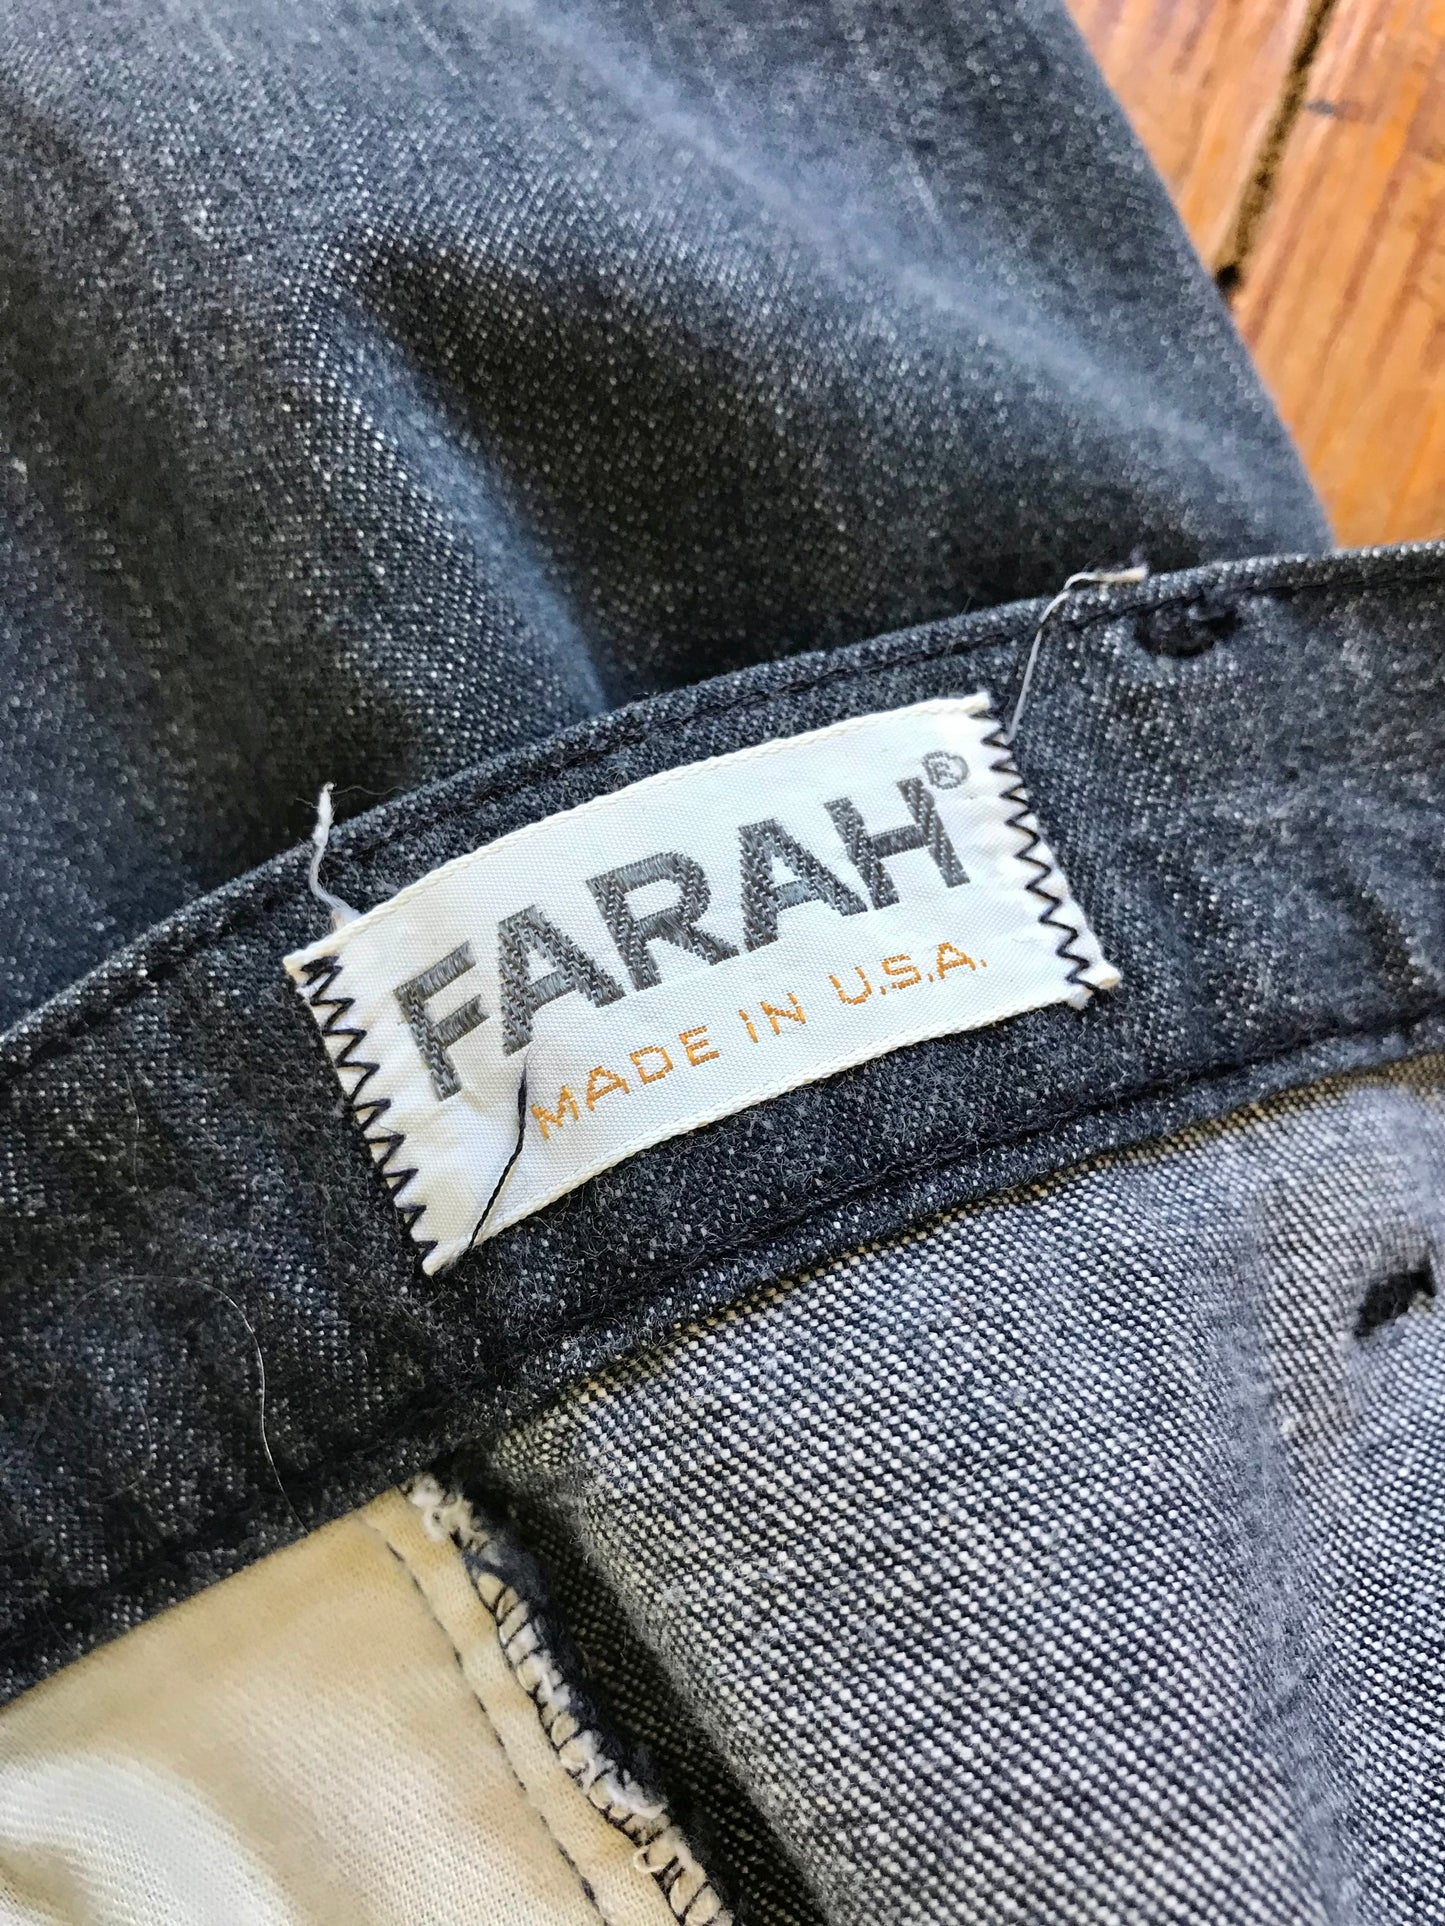 ’70s Vintage Denim Pants  MADE IN USA [A25940]